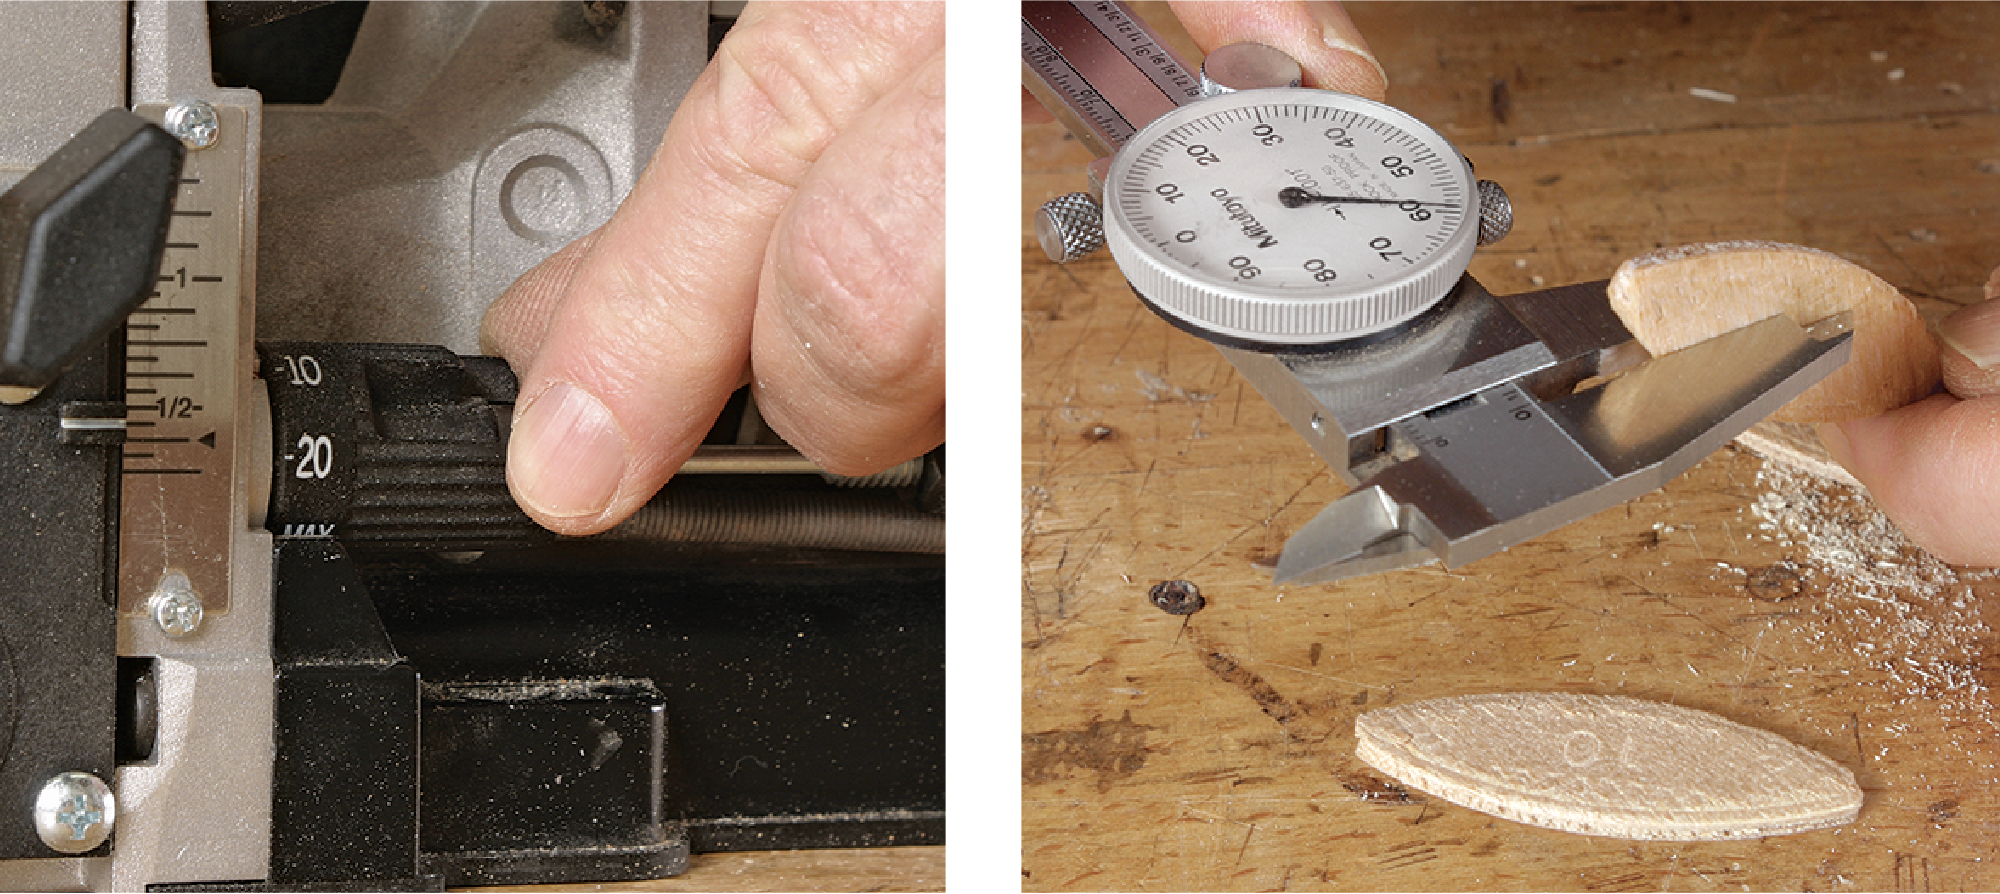 Simple and efficient. An adjustable stop on the joiner (left) controls the depth of cut to match each of the common biscuit sizes—0, 10, and 20. A biscuit swells in thickness (right) when wet glue hits it, helping to anchor the joint. So store biscuits in a sealed jar to keep out moisture. 